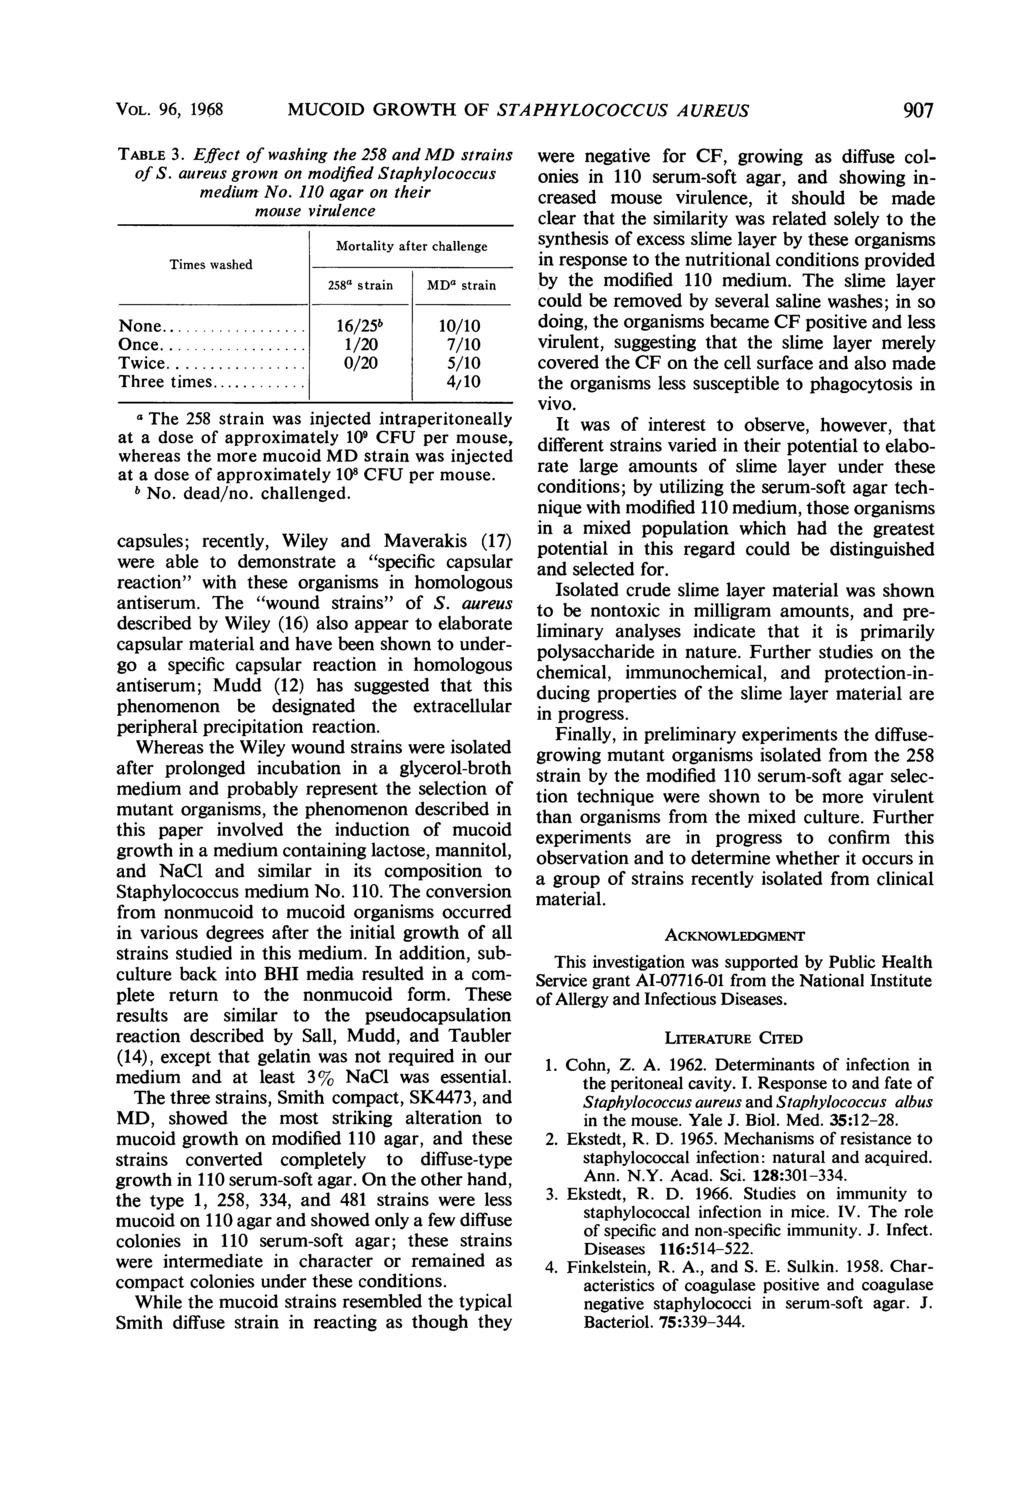 VOL. 96, 1968 MUCOID GROWTH OF STAPHYLOCOCCUS AUREUS 907 TABLE 3. Effect of washing the 258 and MD strains of S. aureus grown on modified Staphylococcus medium No.